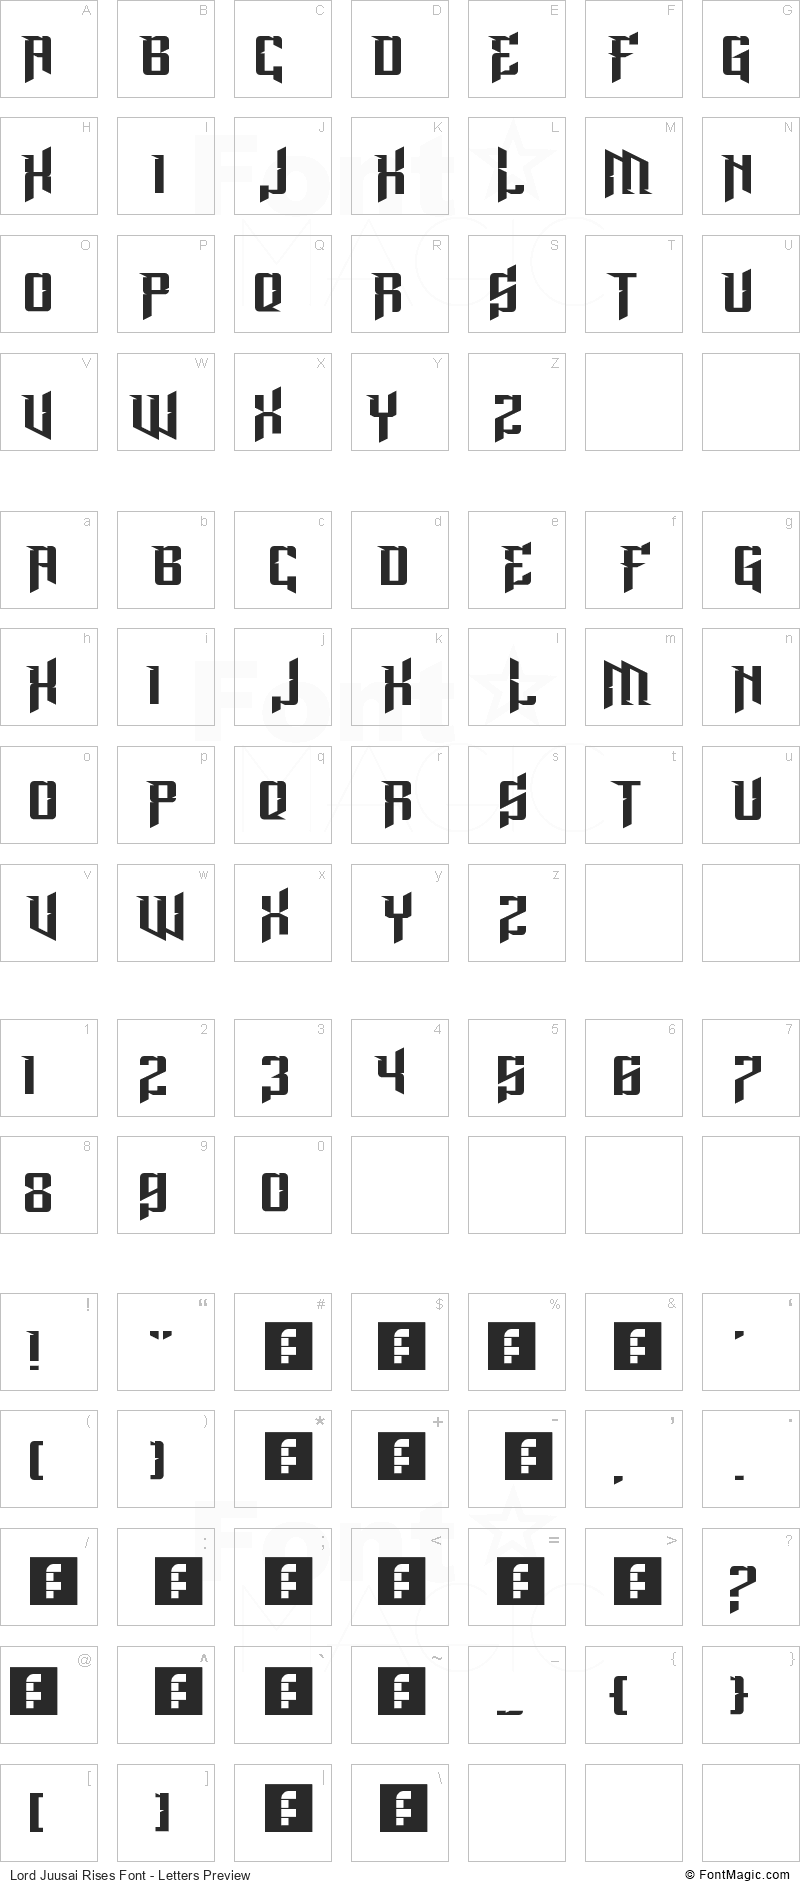 Lord Juusai Rises Font - All Latters Preview Chart